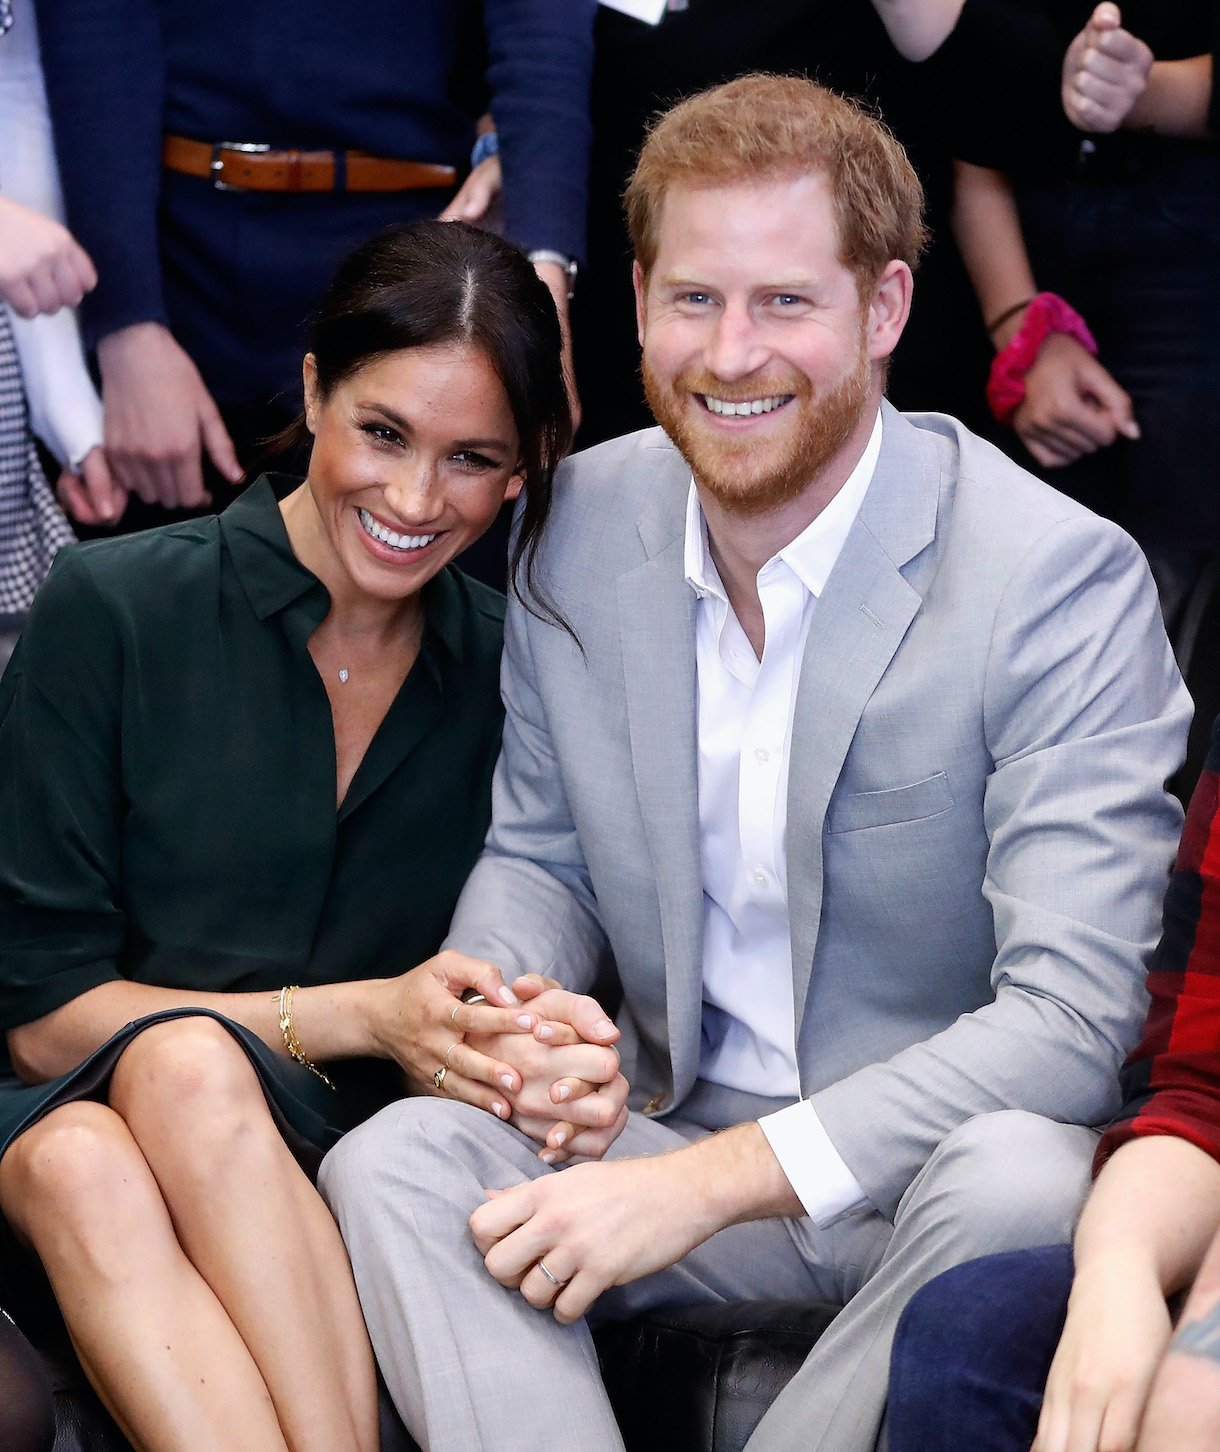 Meghan, Duchess of Sussex and Prince Harry, Duke of Sussex smile